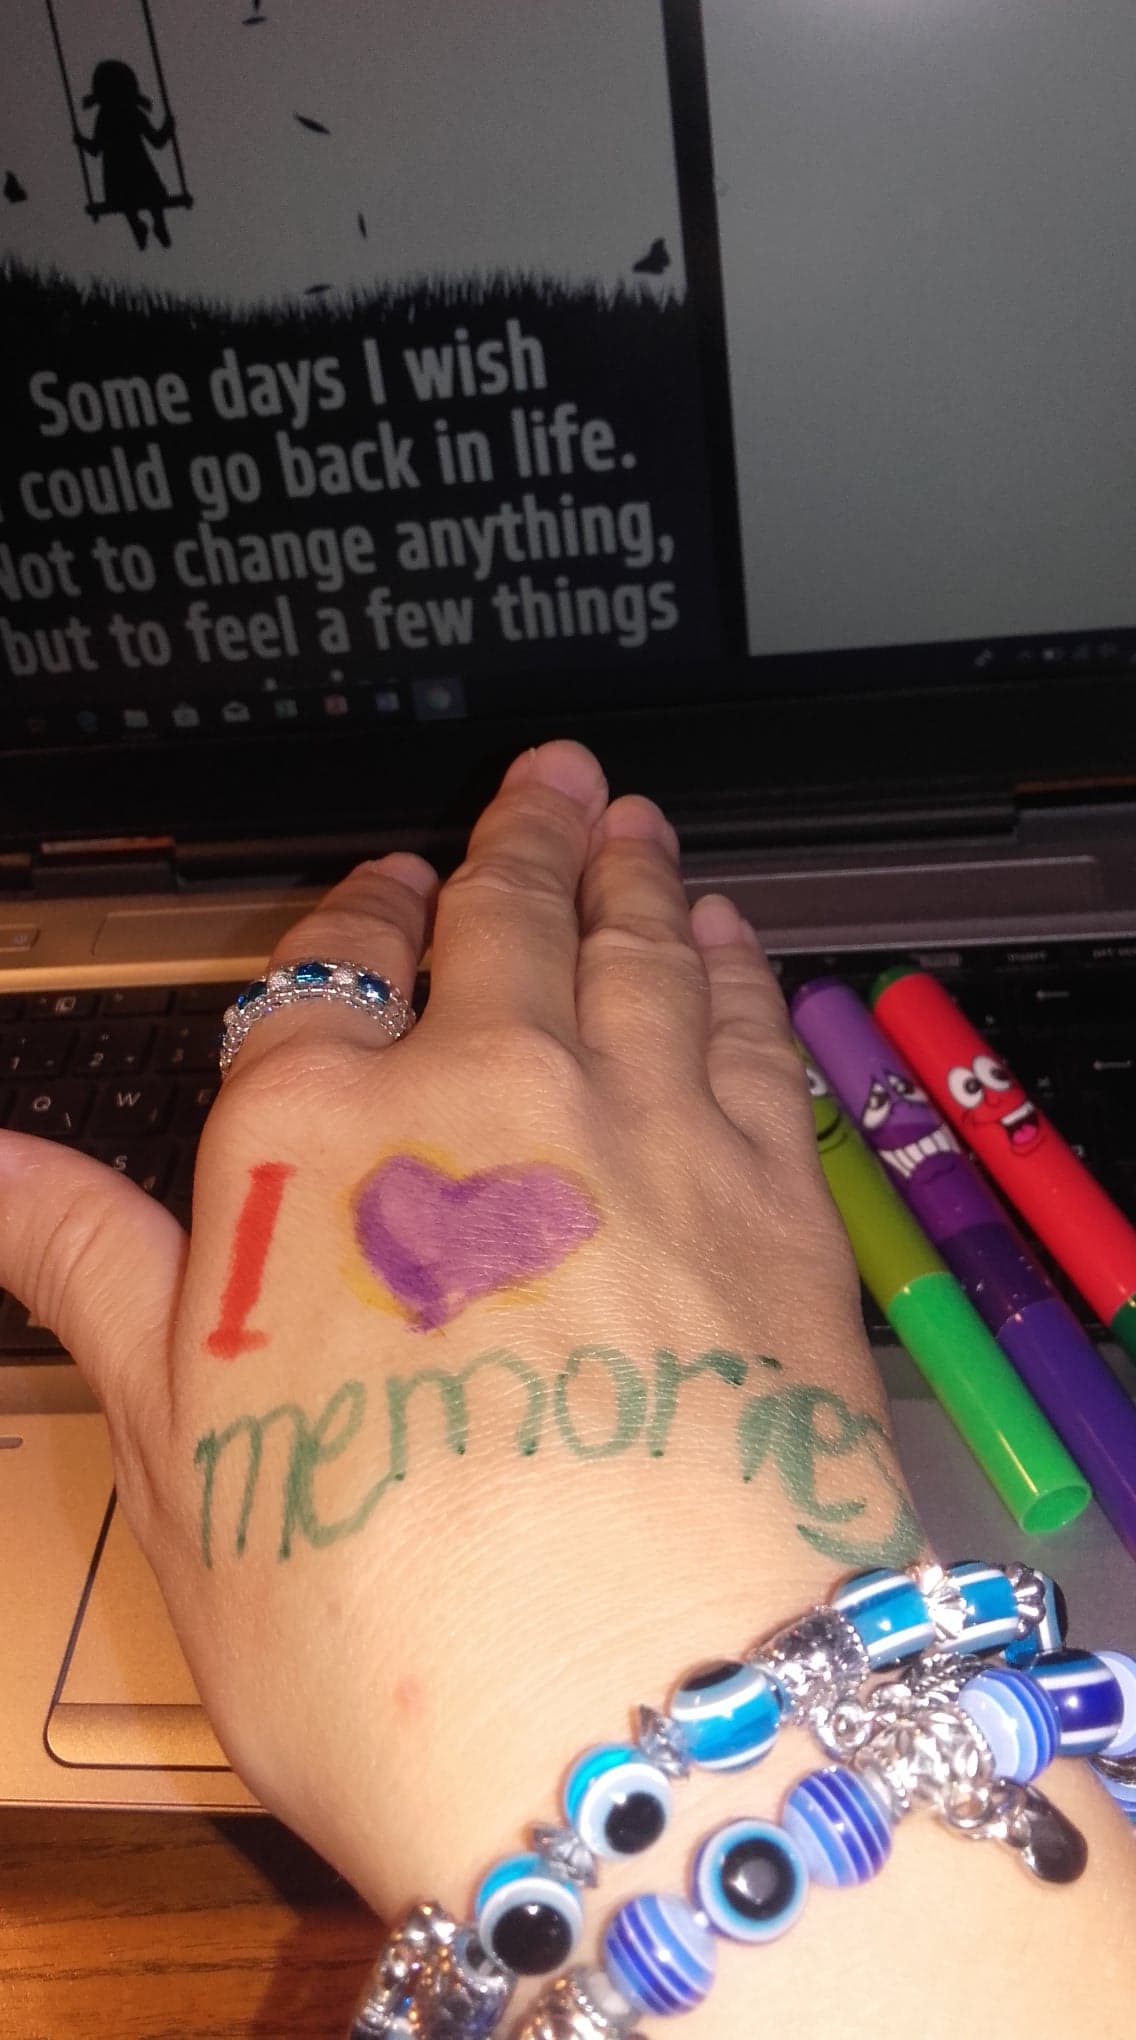 #I love memories; how about you?